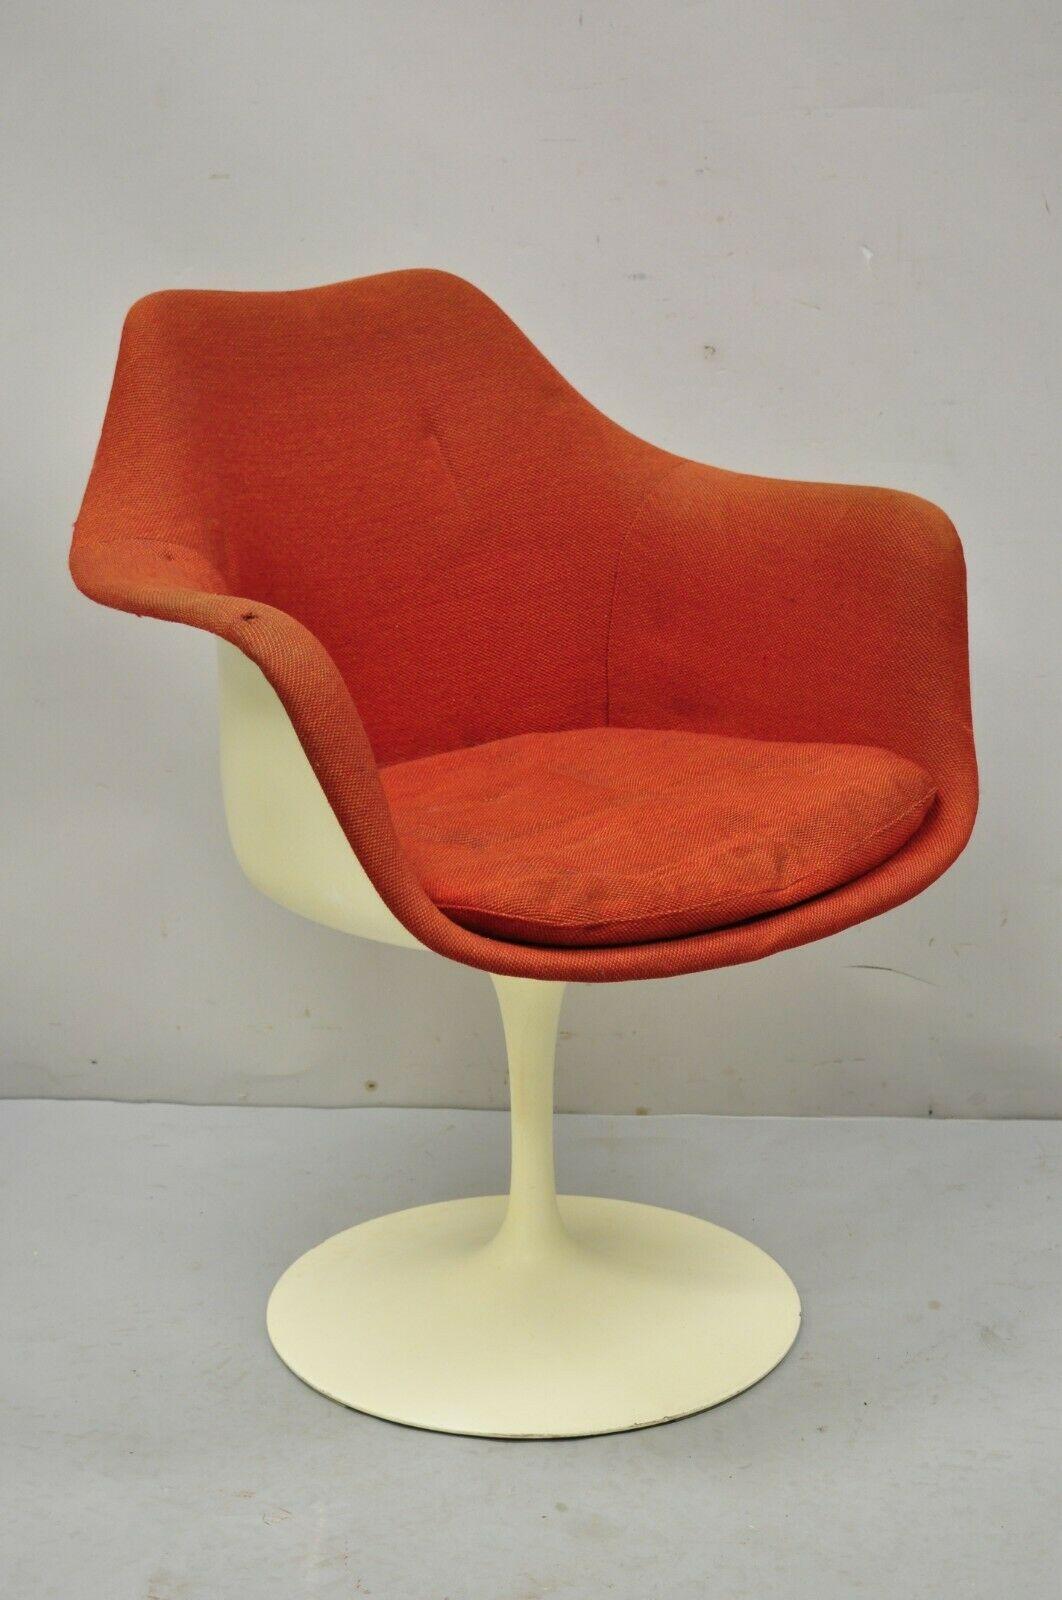 Vintage Knoll Eero Saarinen Red Upholstered Fiberglass Tulip Arm Chair. Item features fiberglass seat, original red upholstery, original labels, clean Modernist lines, quality American craftsmanship, great style and form. Circa mid 20th century.